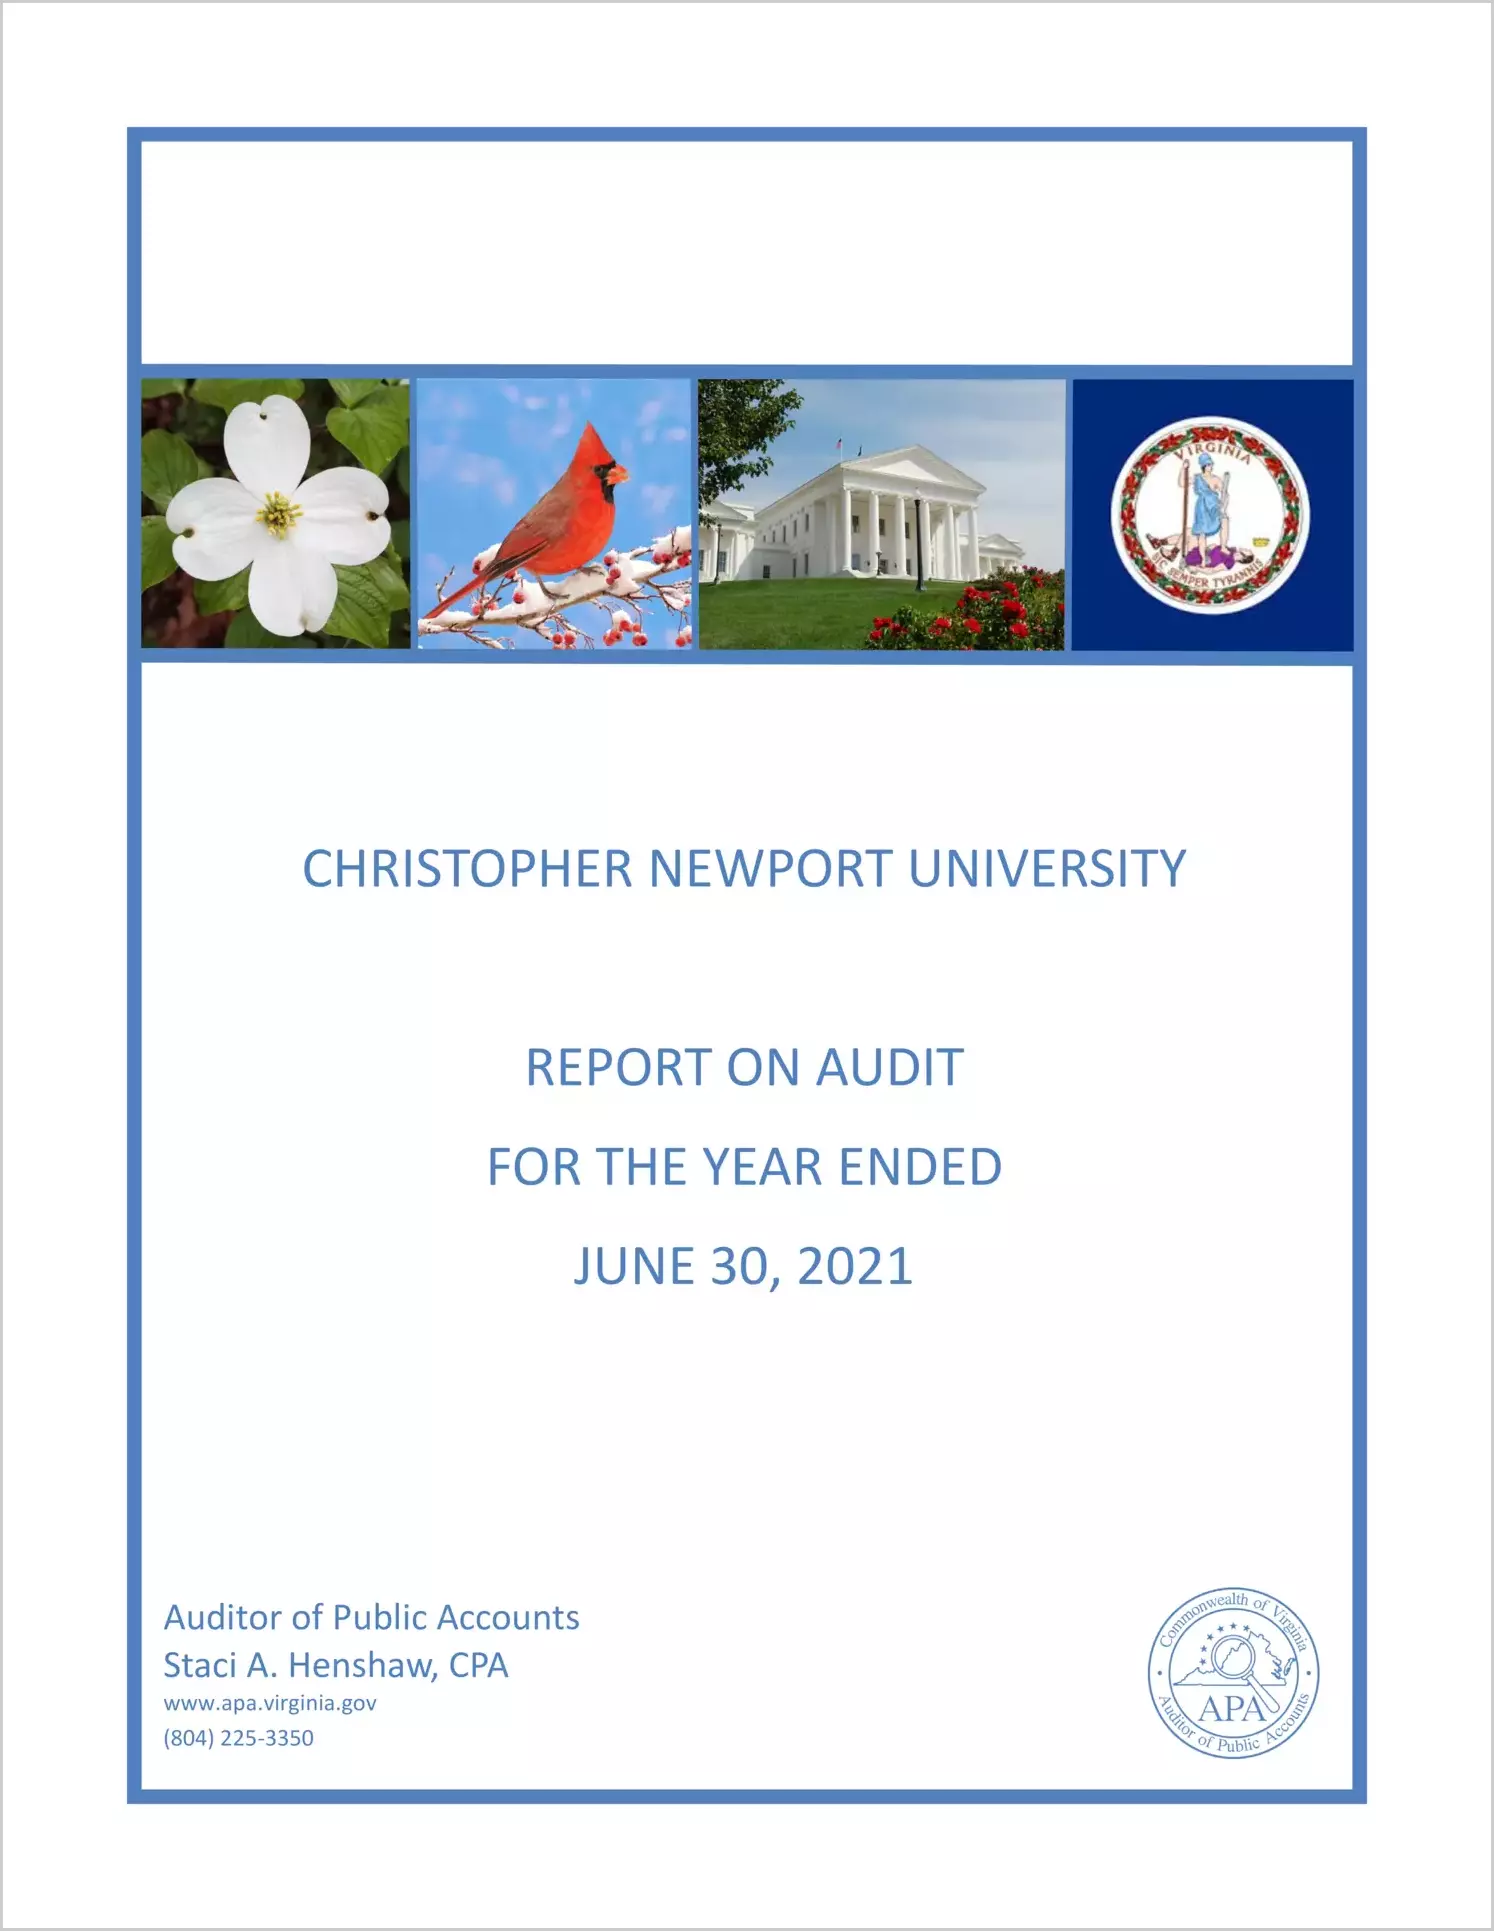 Christopher Newport University for the year ended June 30, 2021